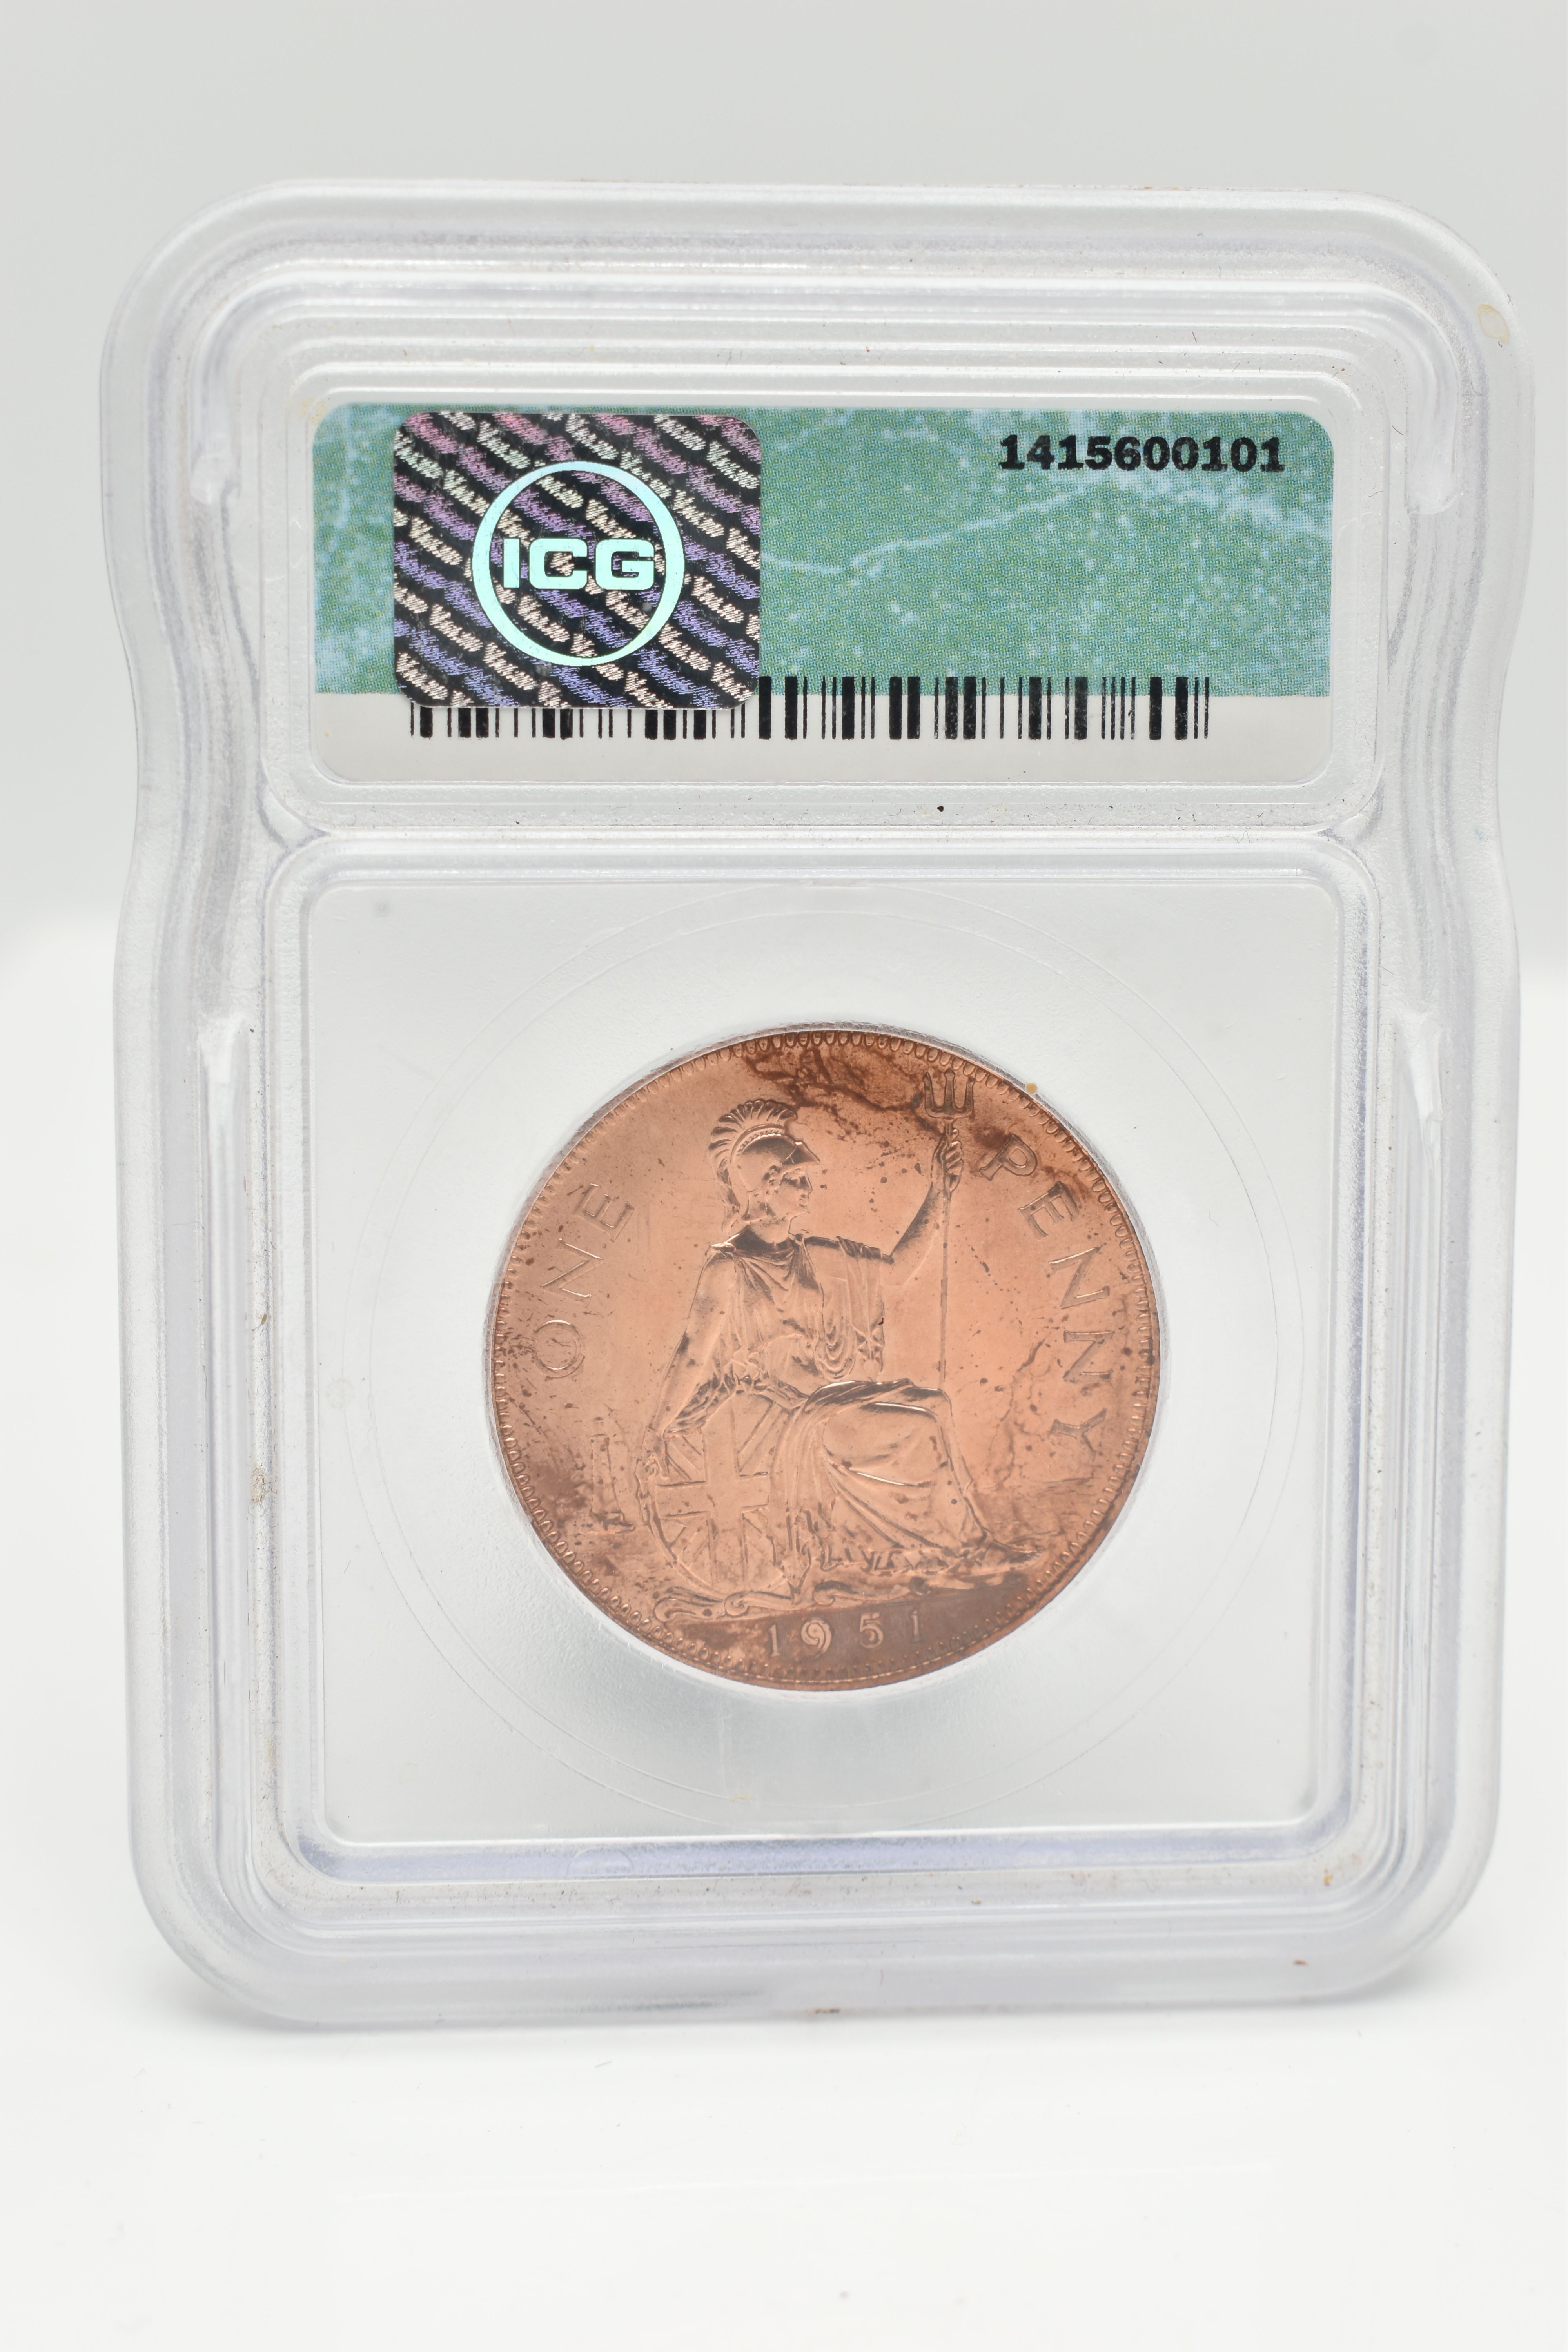 A 1951 GEORGE V1 PROOF PENNY COIN SLABBED and GRADED by I.C.G. And Verified PR65 RD (1415600101) - Image 2 of 2